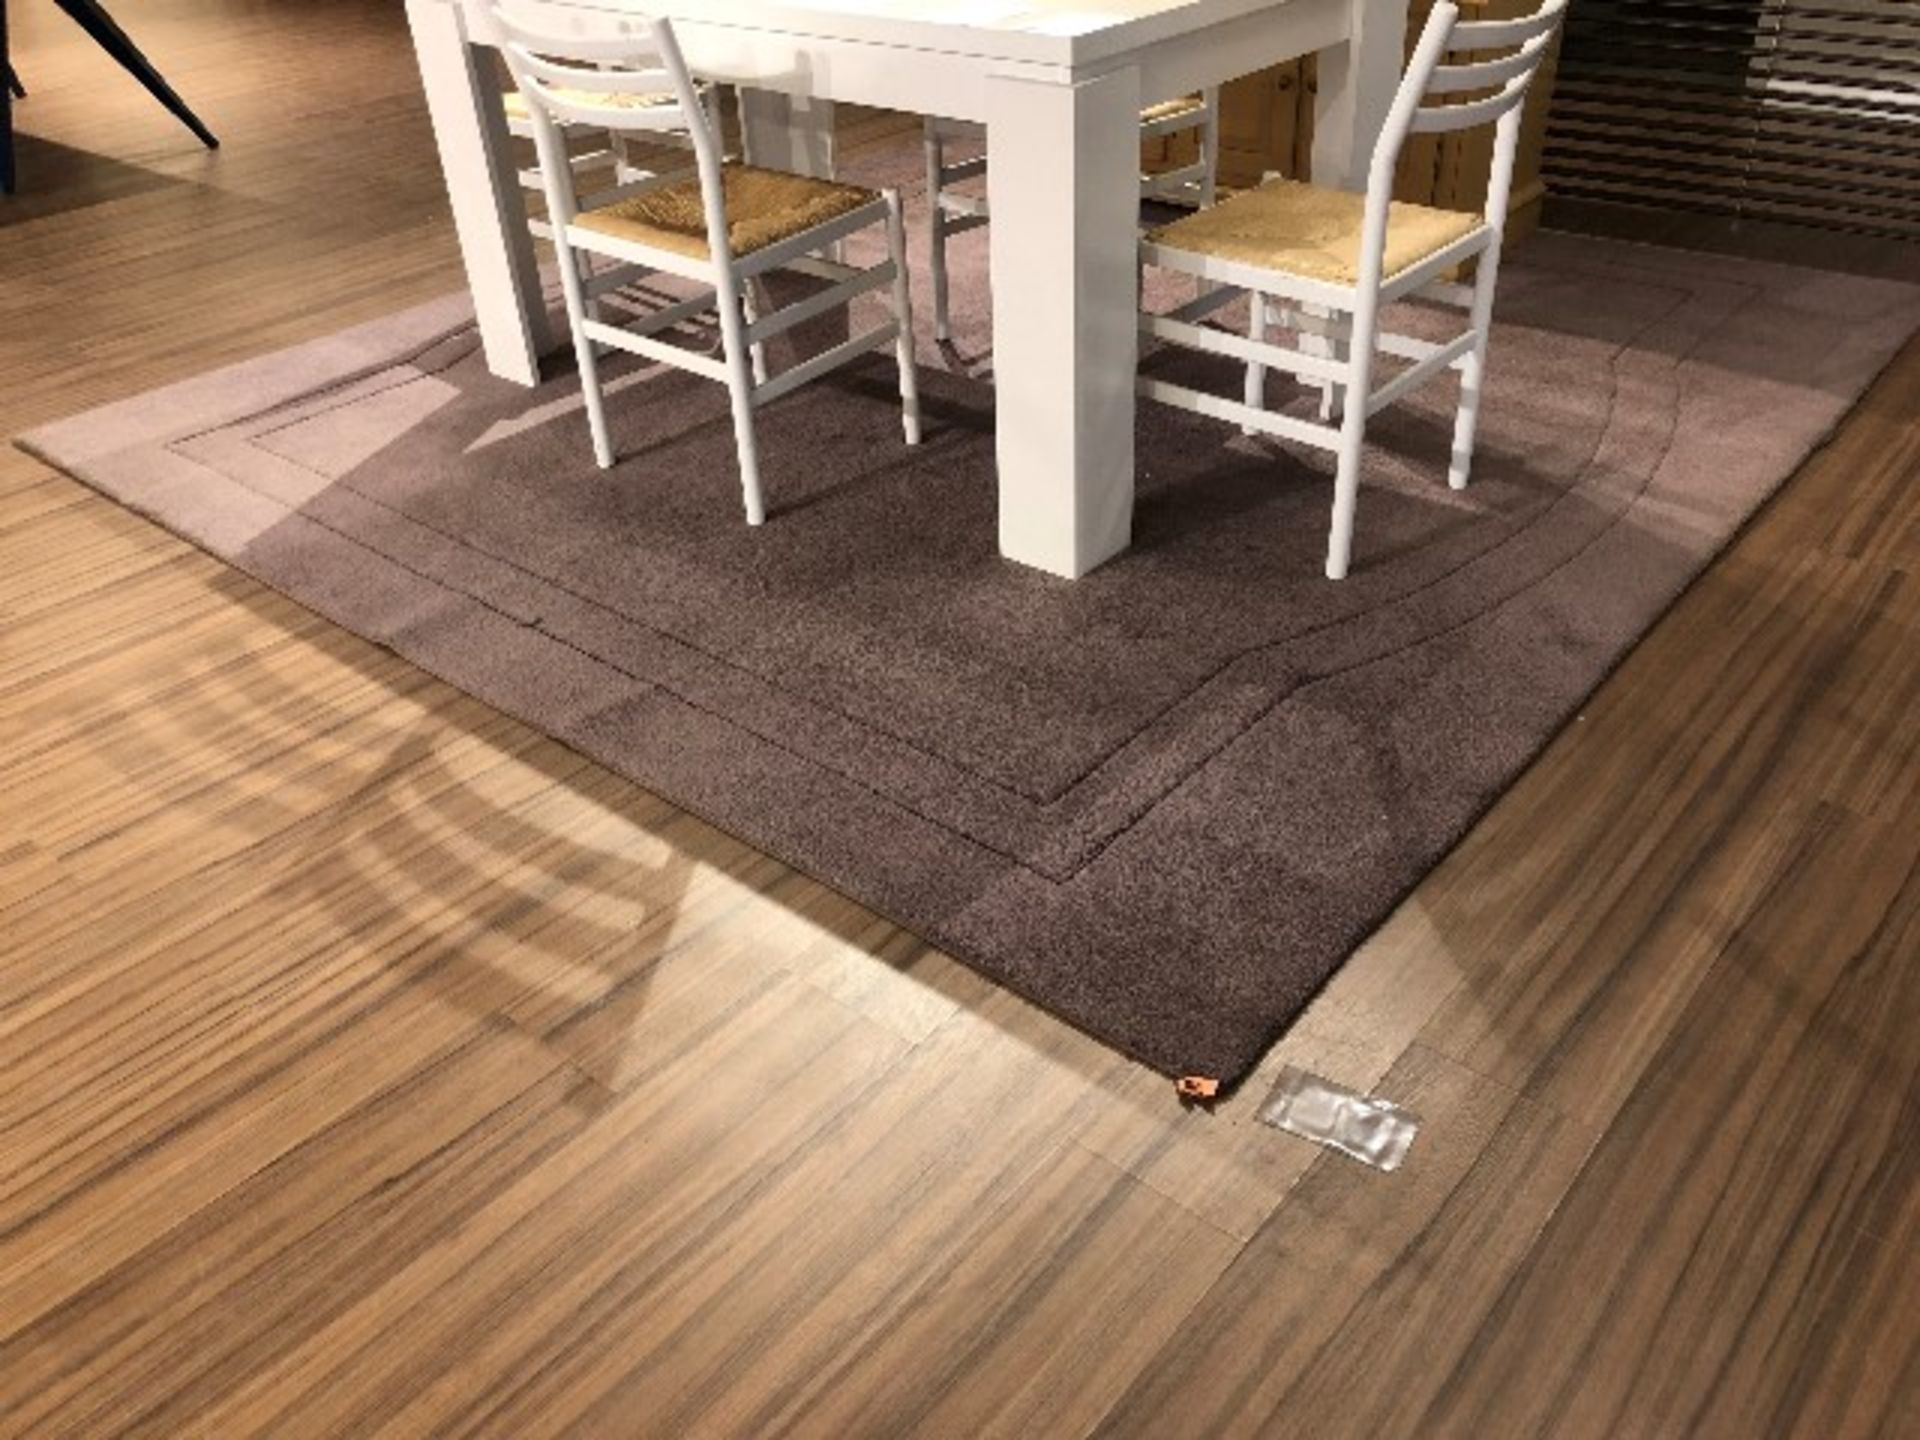 Area carpet, approx.9ftx9ft, showroom demo